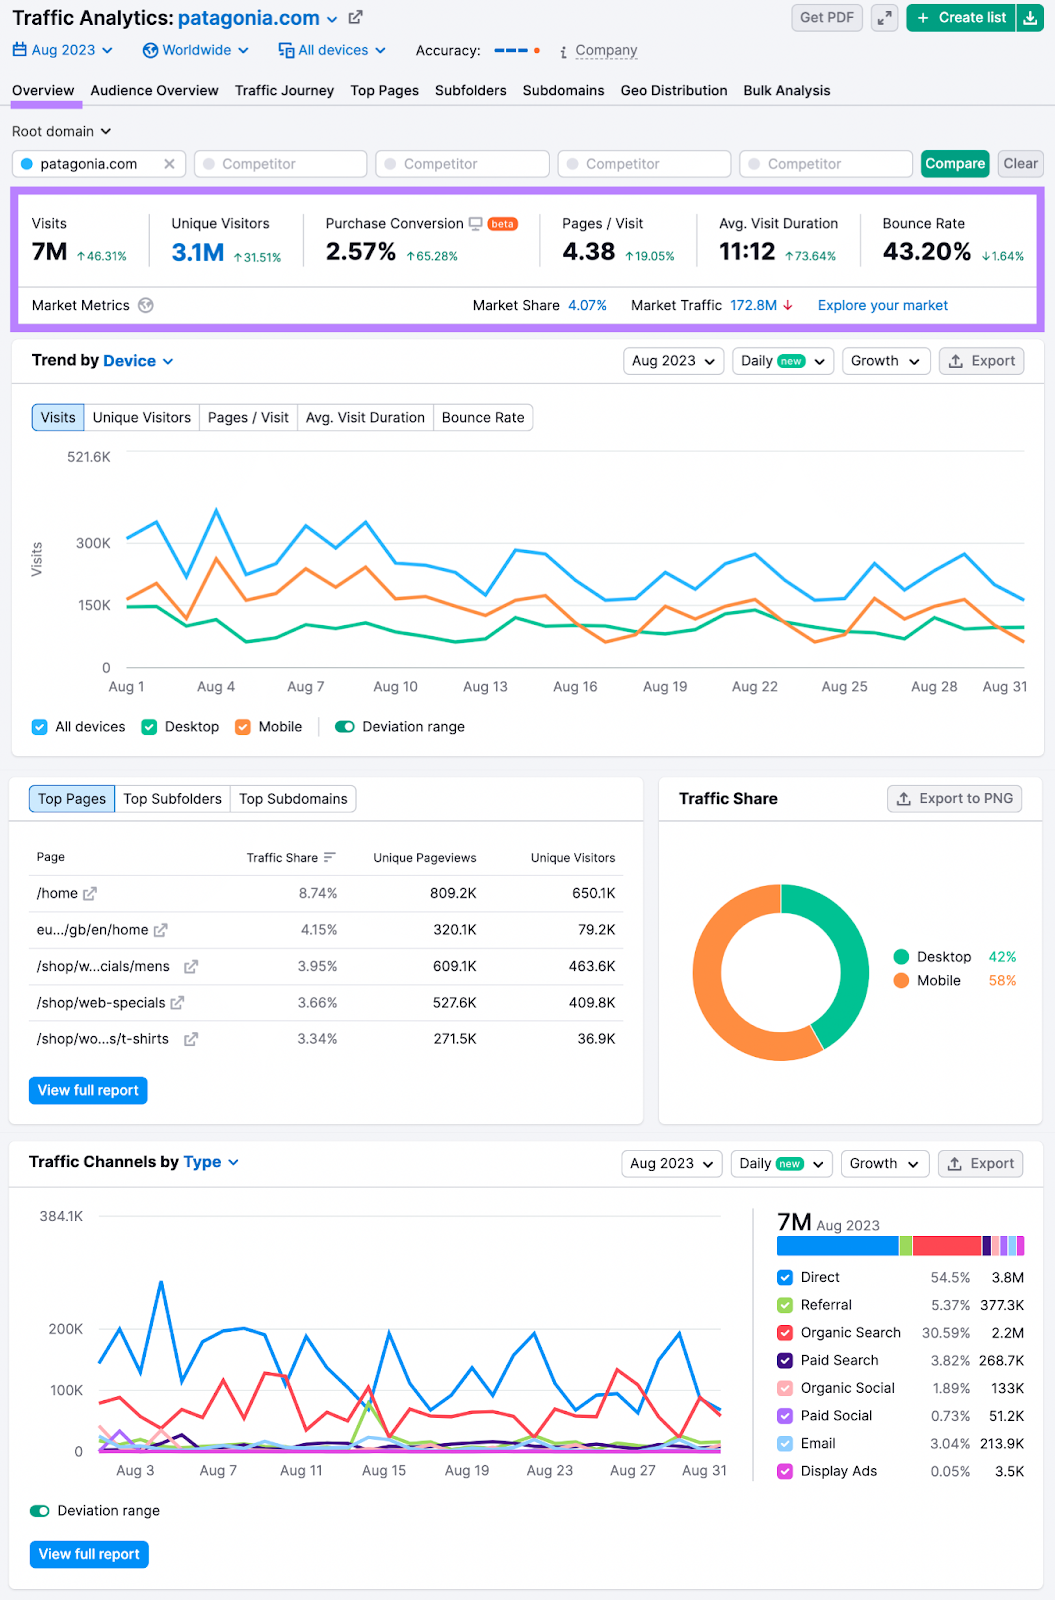 Traffic Analytics overview report for "patagonia.com"